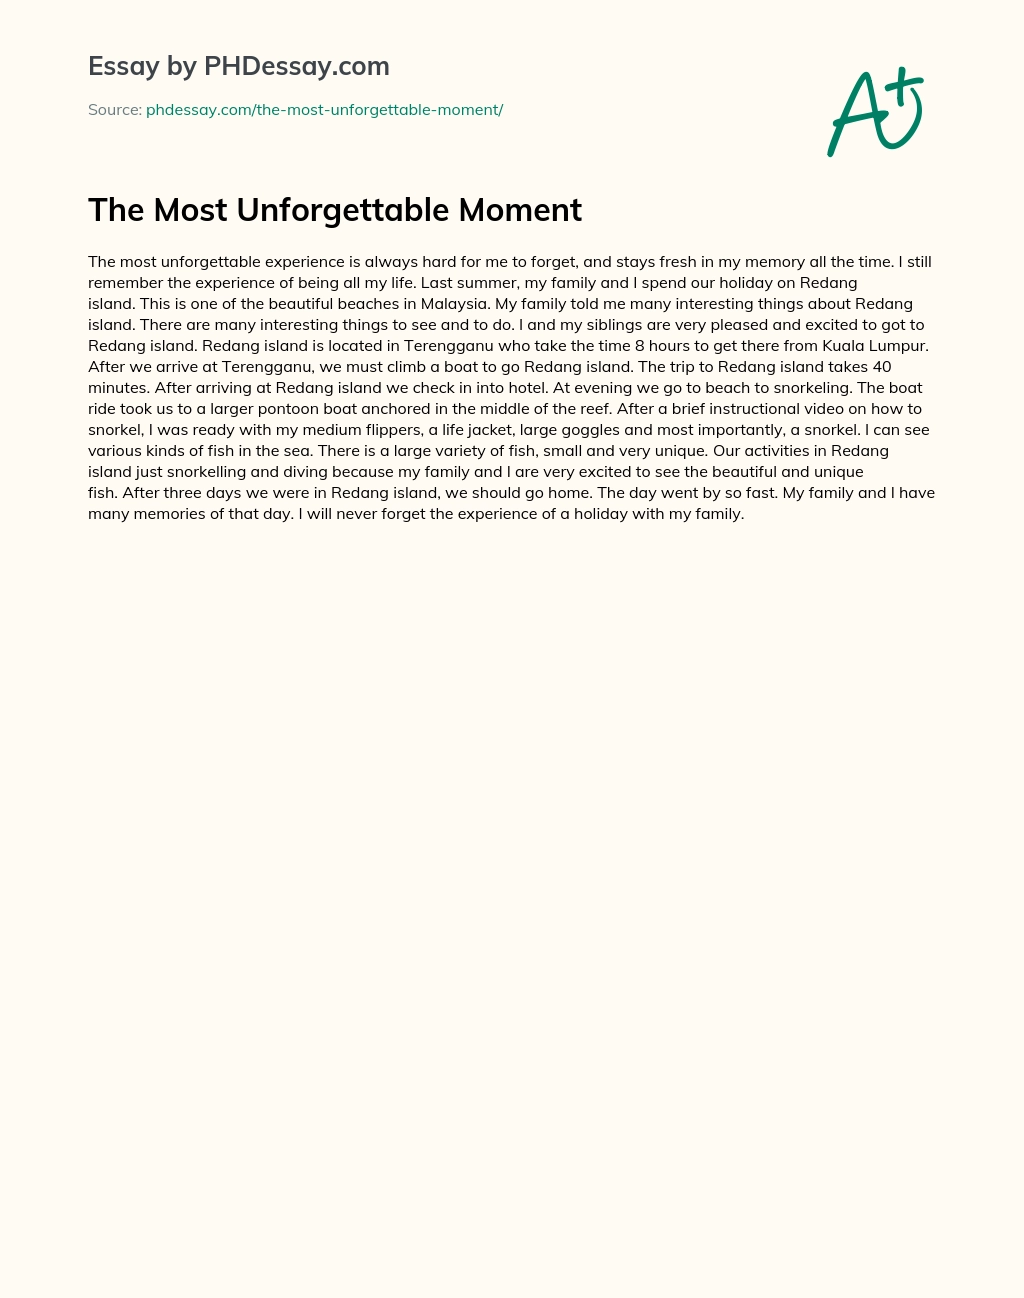 example of short essay about unforgettable experience